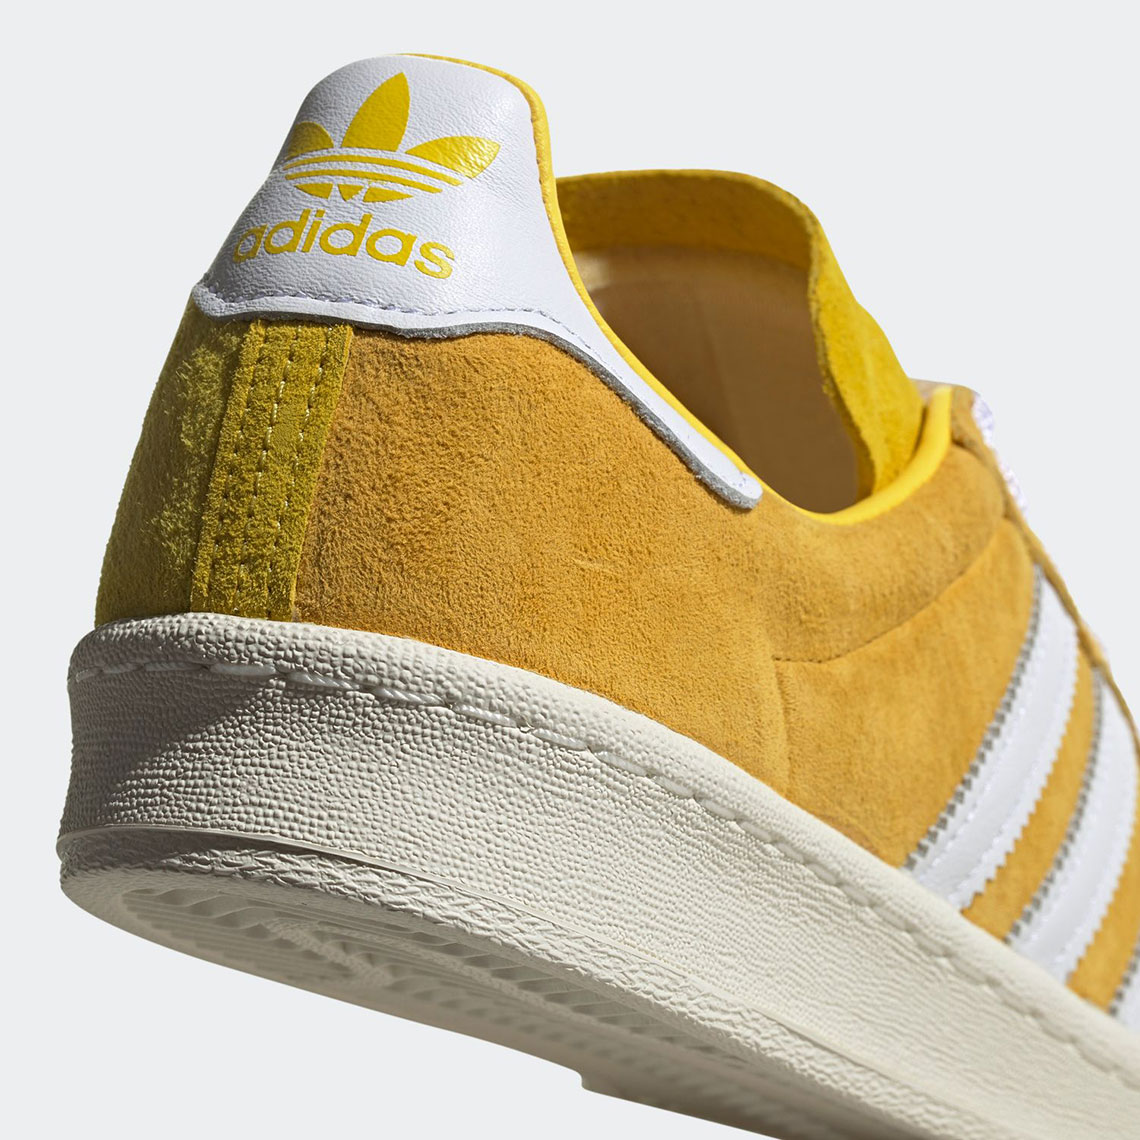 Adidas Campus 80s Bold Gold Cloud White Yellow Fx5443 1